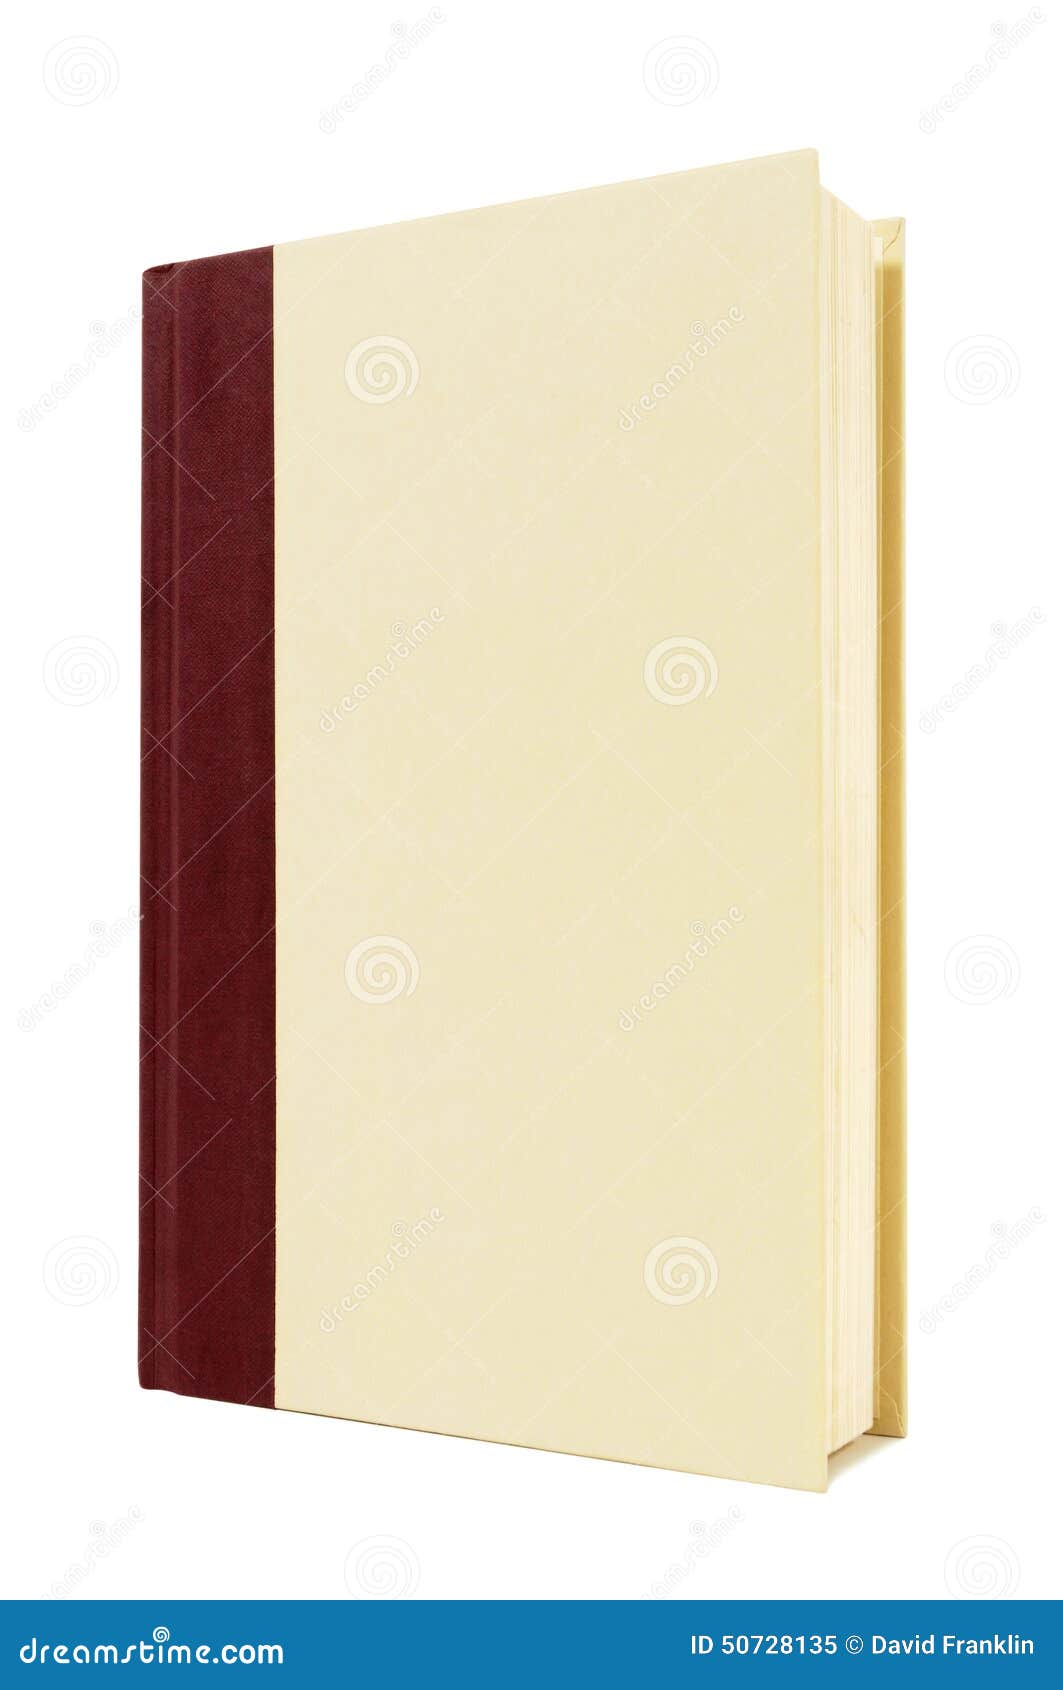 burgundy and cream hardback book, front cover, standing upright, vertical, copy space